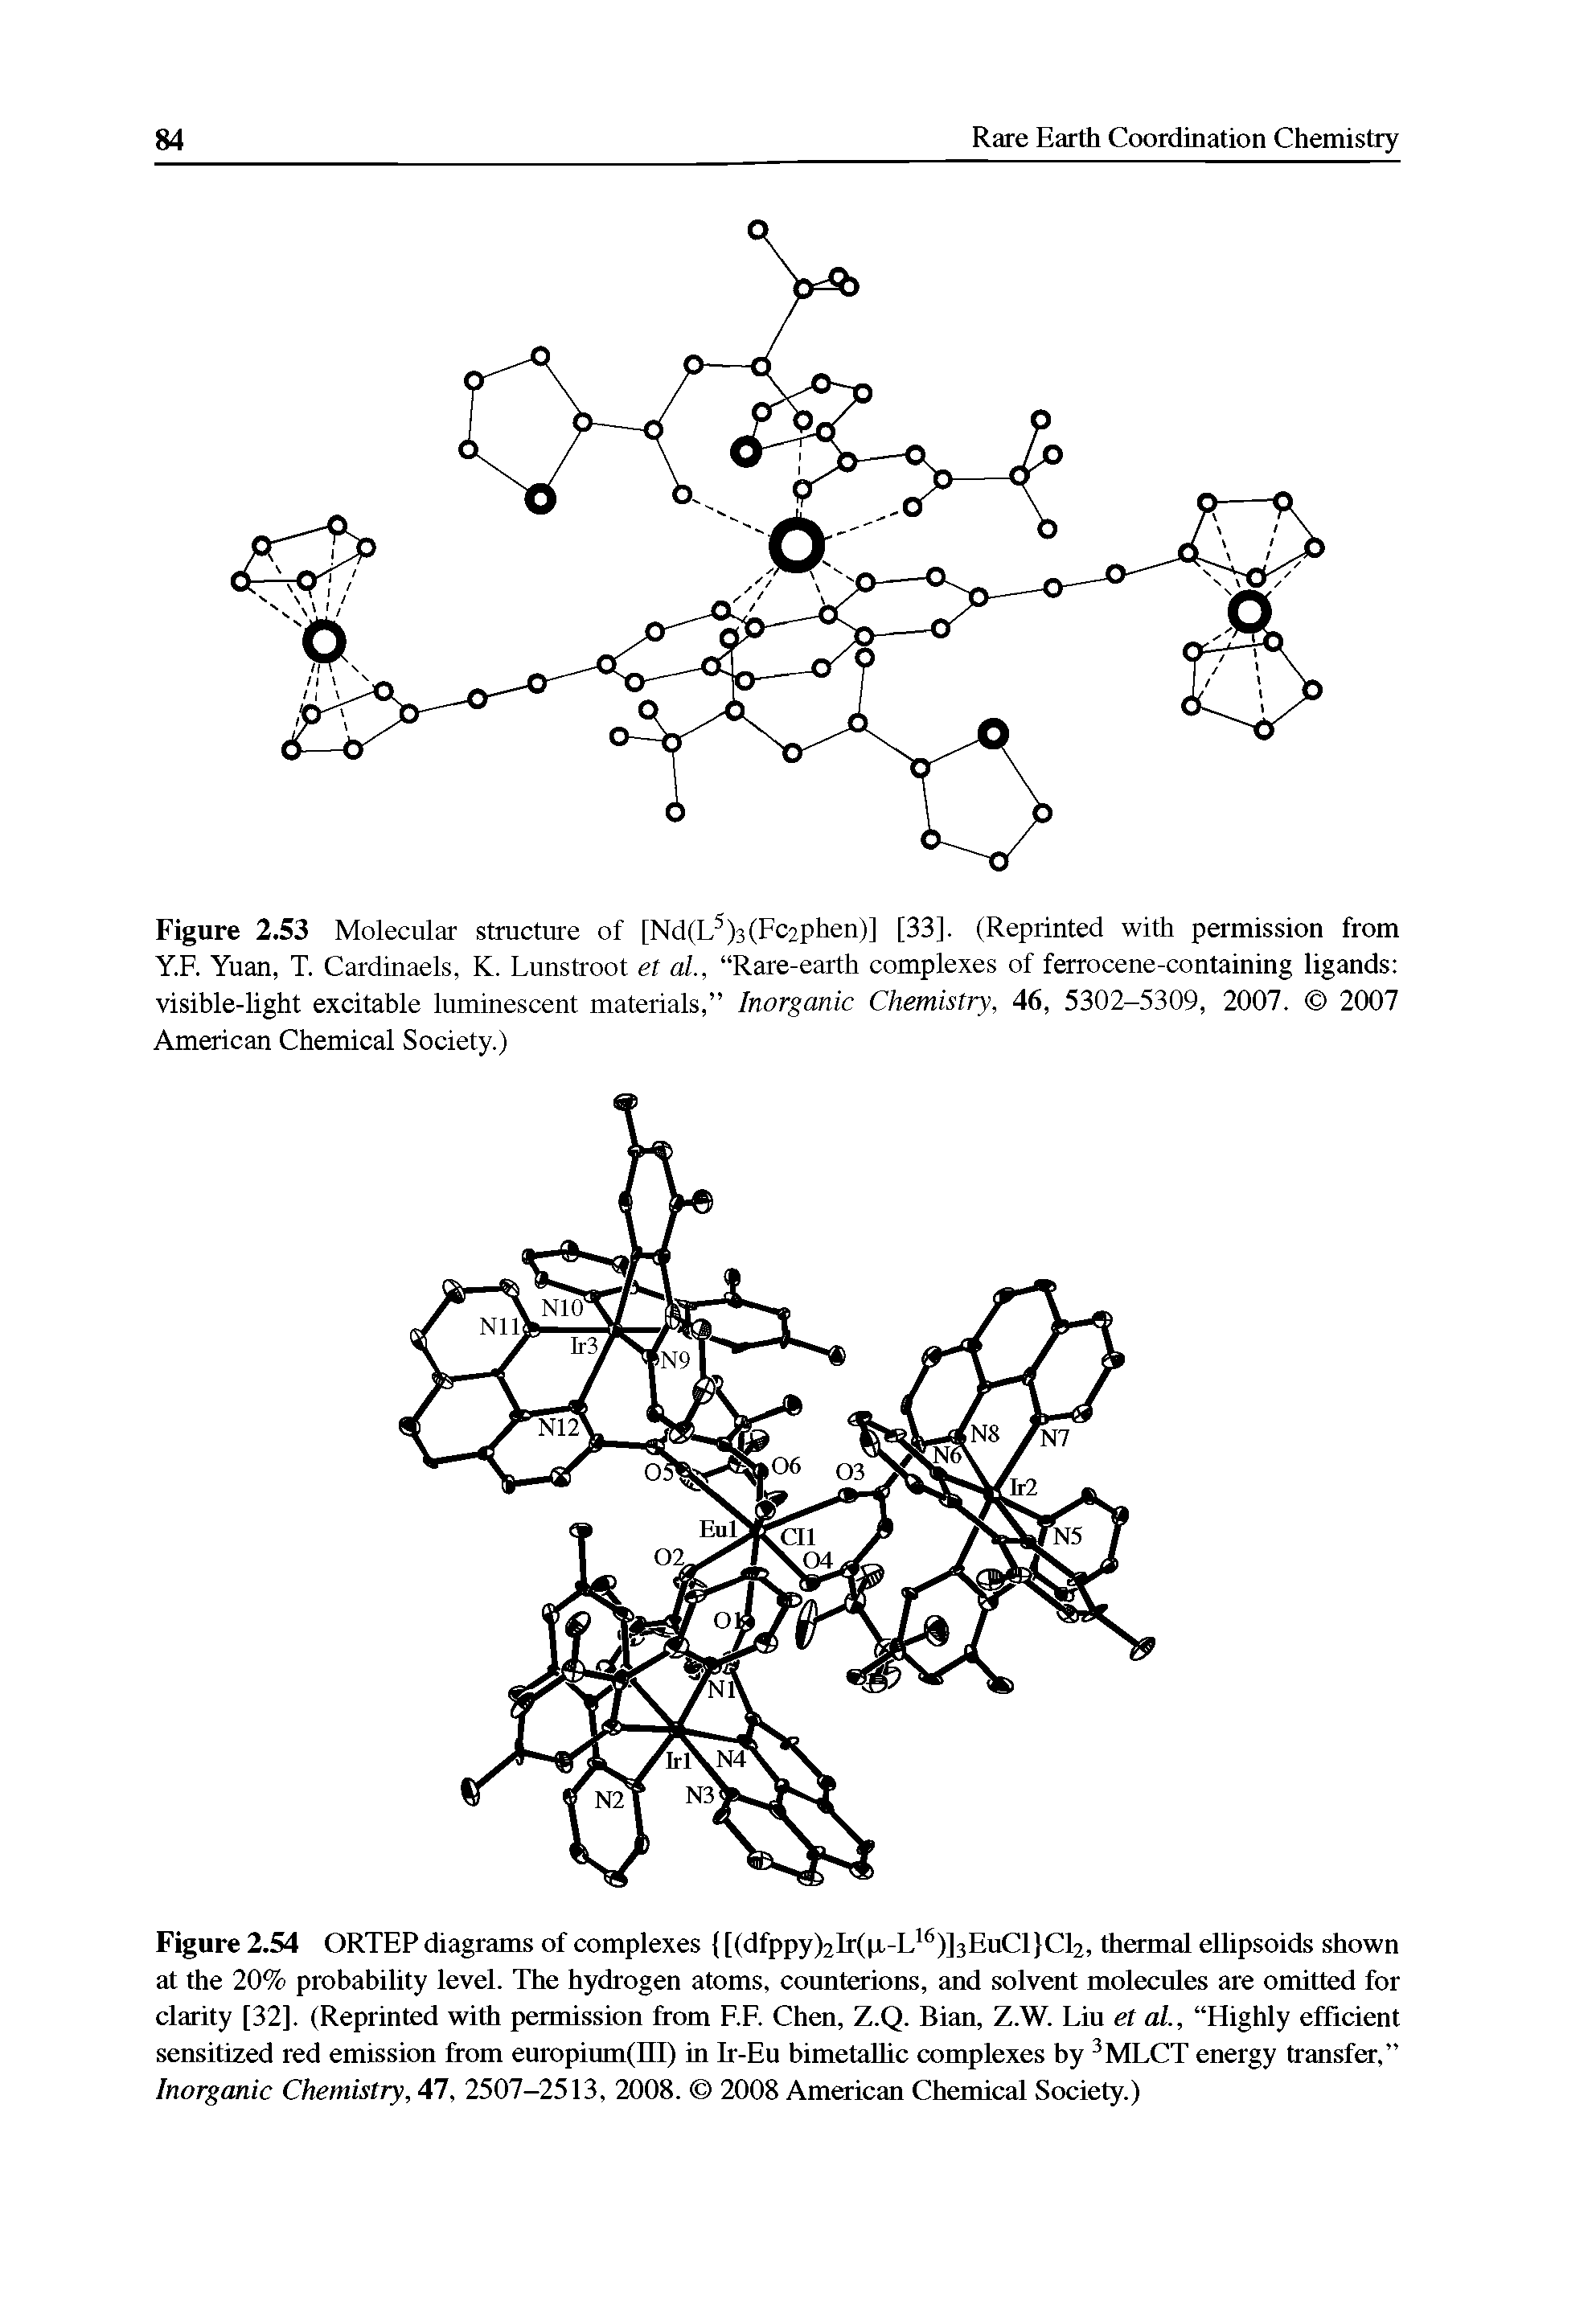 Figure 2.53 Molecular structure of [Nd(L )3(Fc2phen)] [33]. (Reprinted with permission from Y.F. Yuan, T. Cardinaels, K. Lunstroot et al, Rare-earth complexes of ferrocene-containing ligands visible-light excitable luminescent materials, Inorganic Chemistry, 46, 5302-5309, 2007. 2007 American Chemical Society.)...